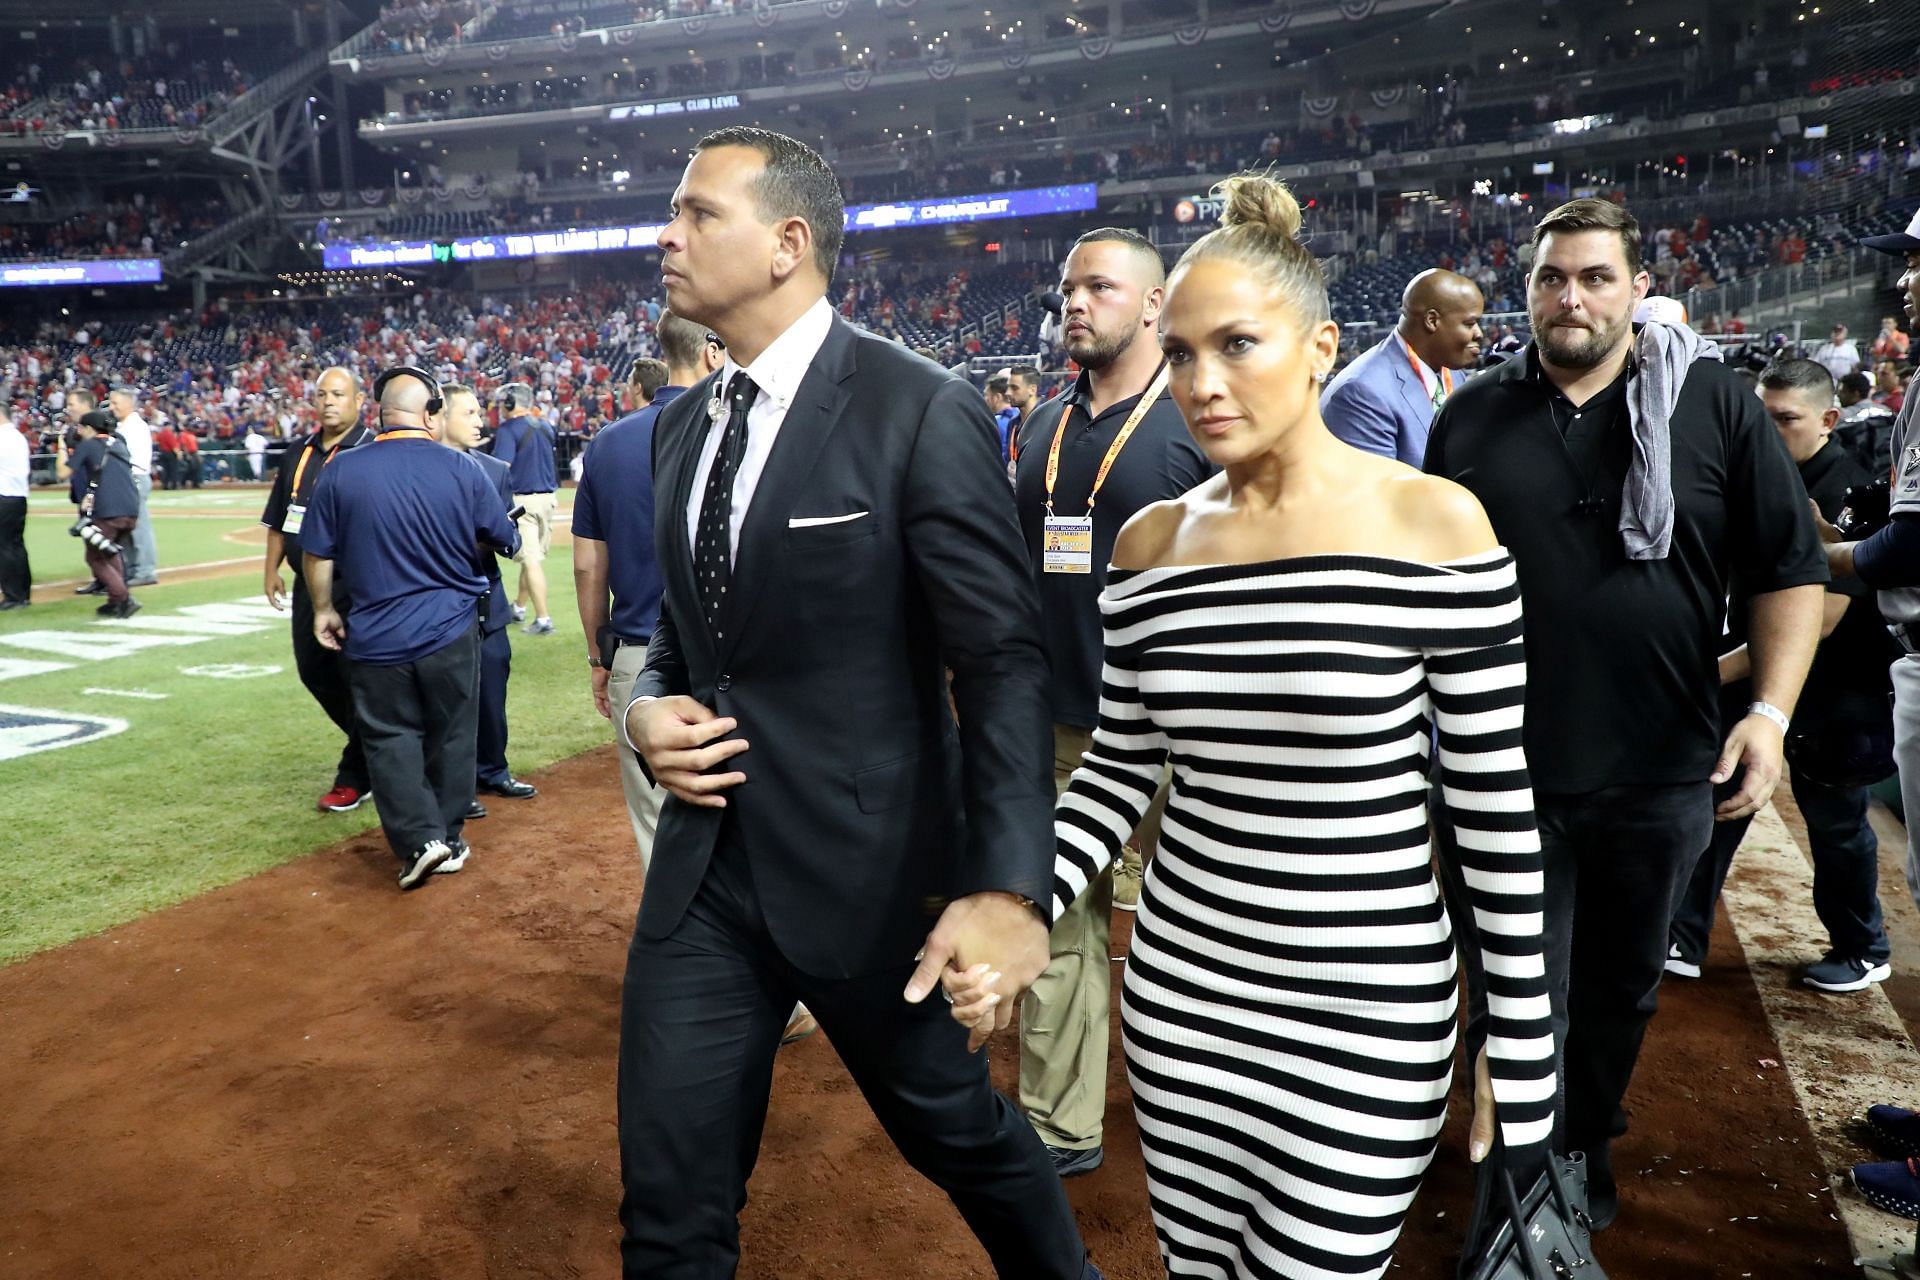 Jose Canseco claims A-Rod is cheating on new fiancée J.Lo: 'I am